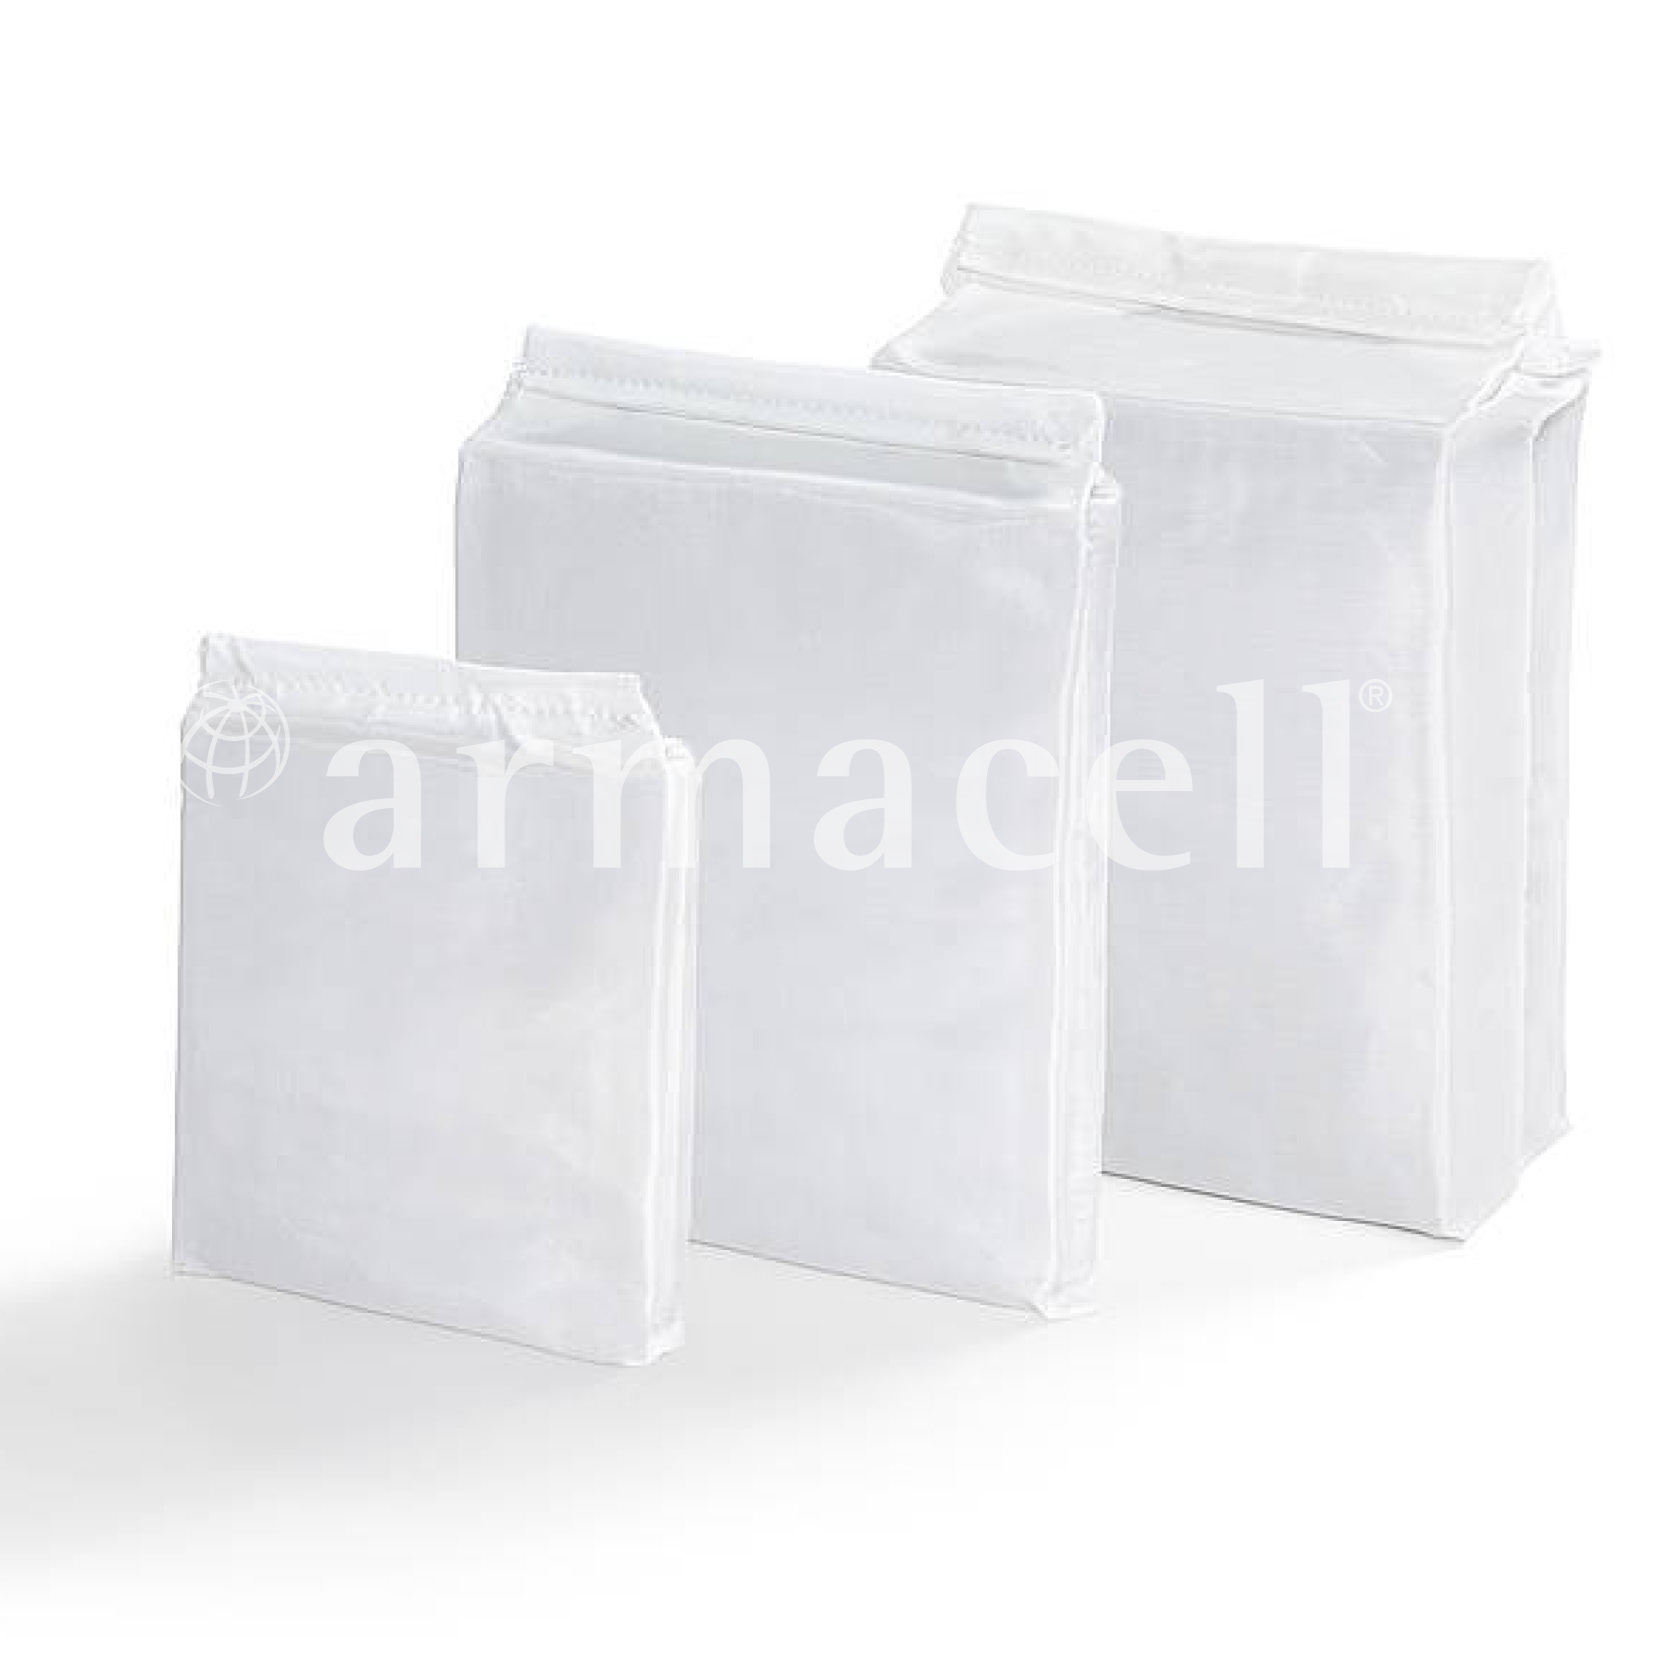 Product_pdpImage-800x800_ArmaProtect_CU_WATERMARK_